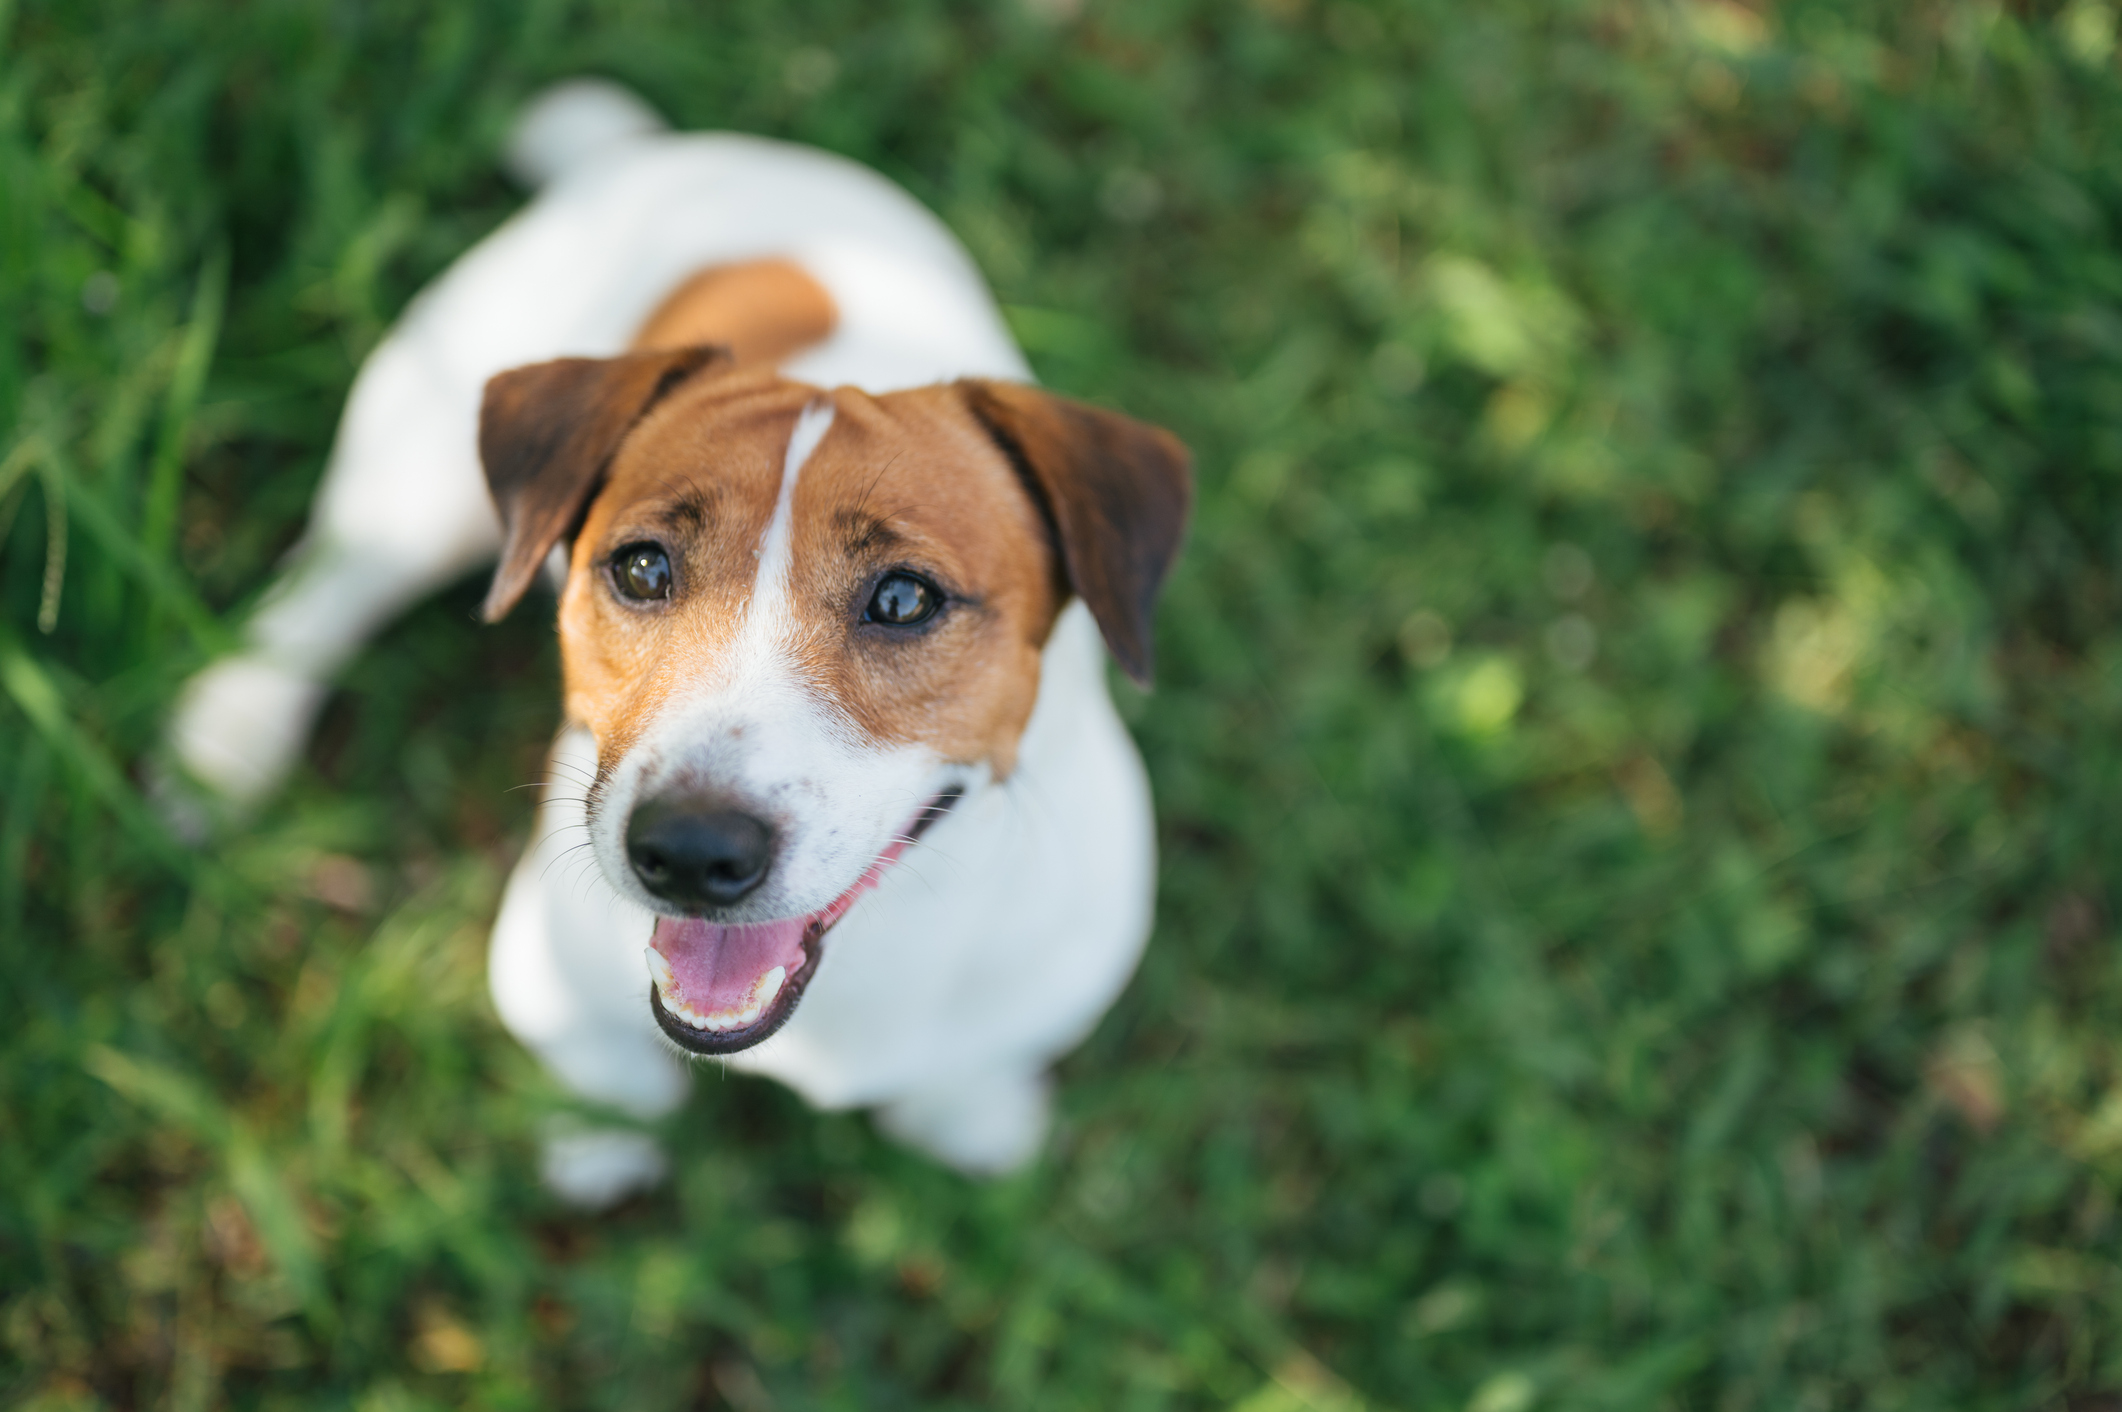 Jack russel terrier on lawn near house. Happy Dog with serious gaze (Getty Images)